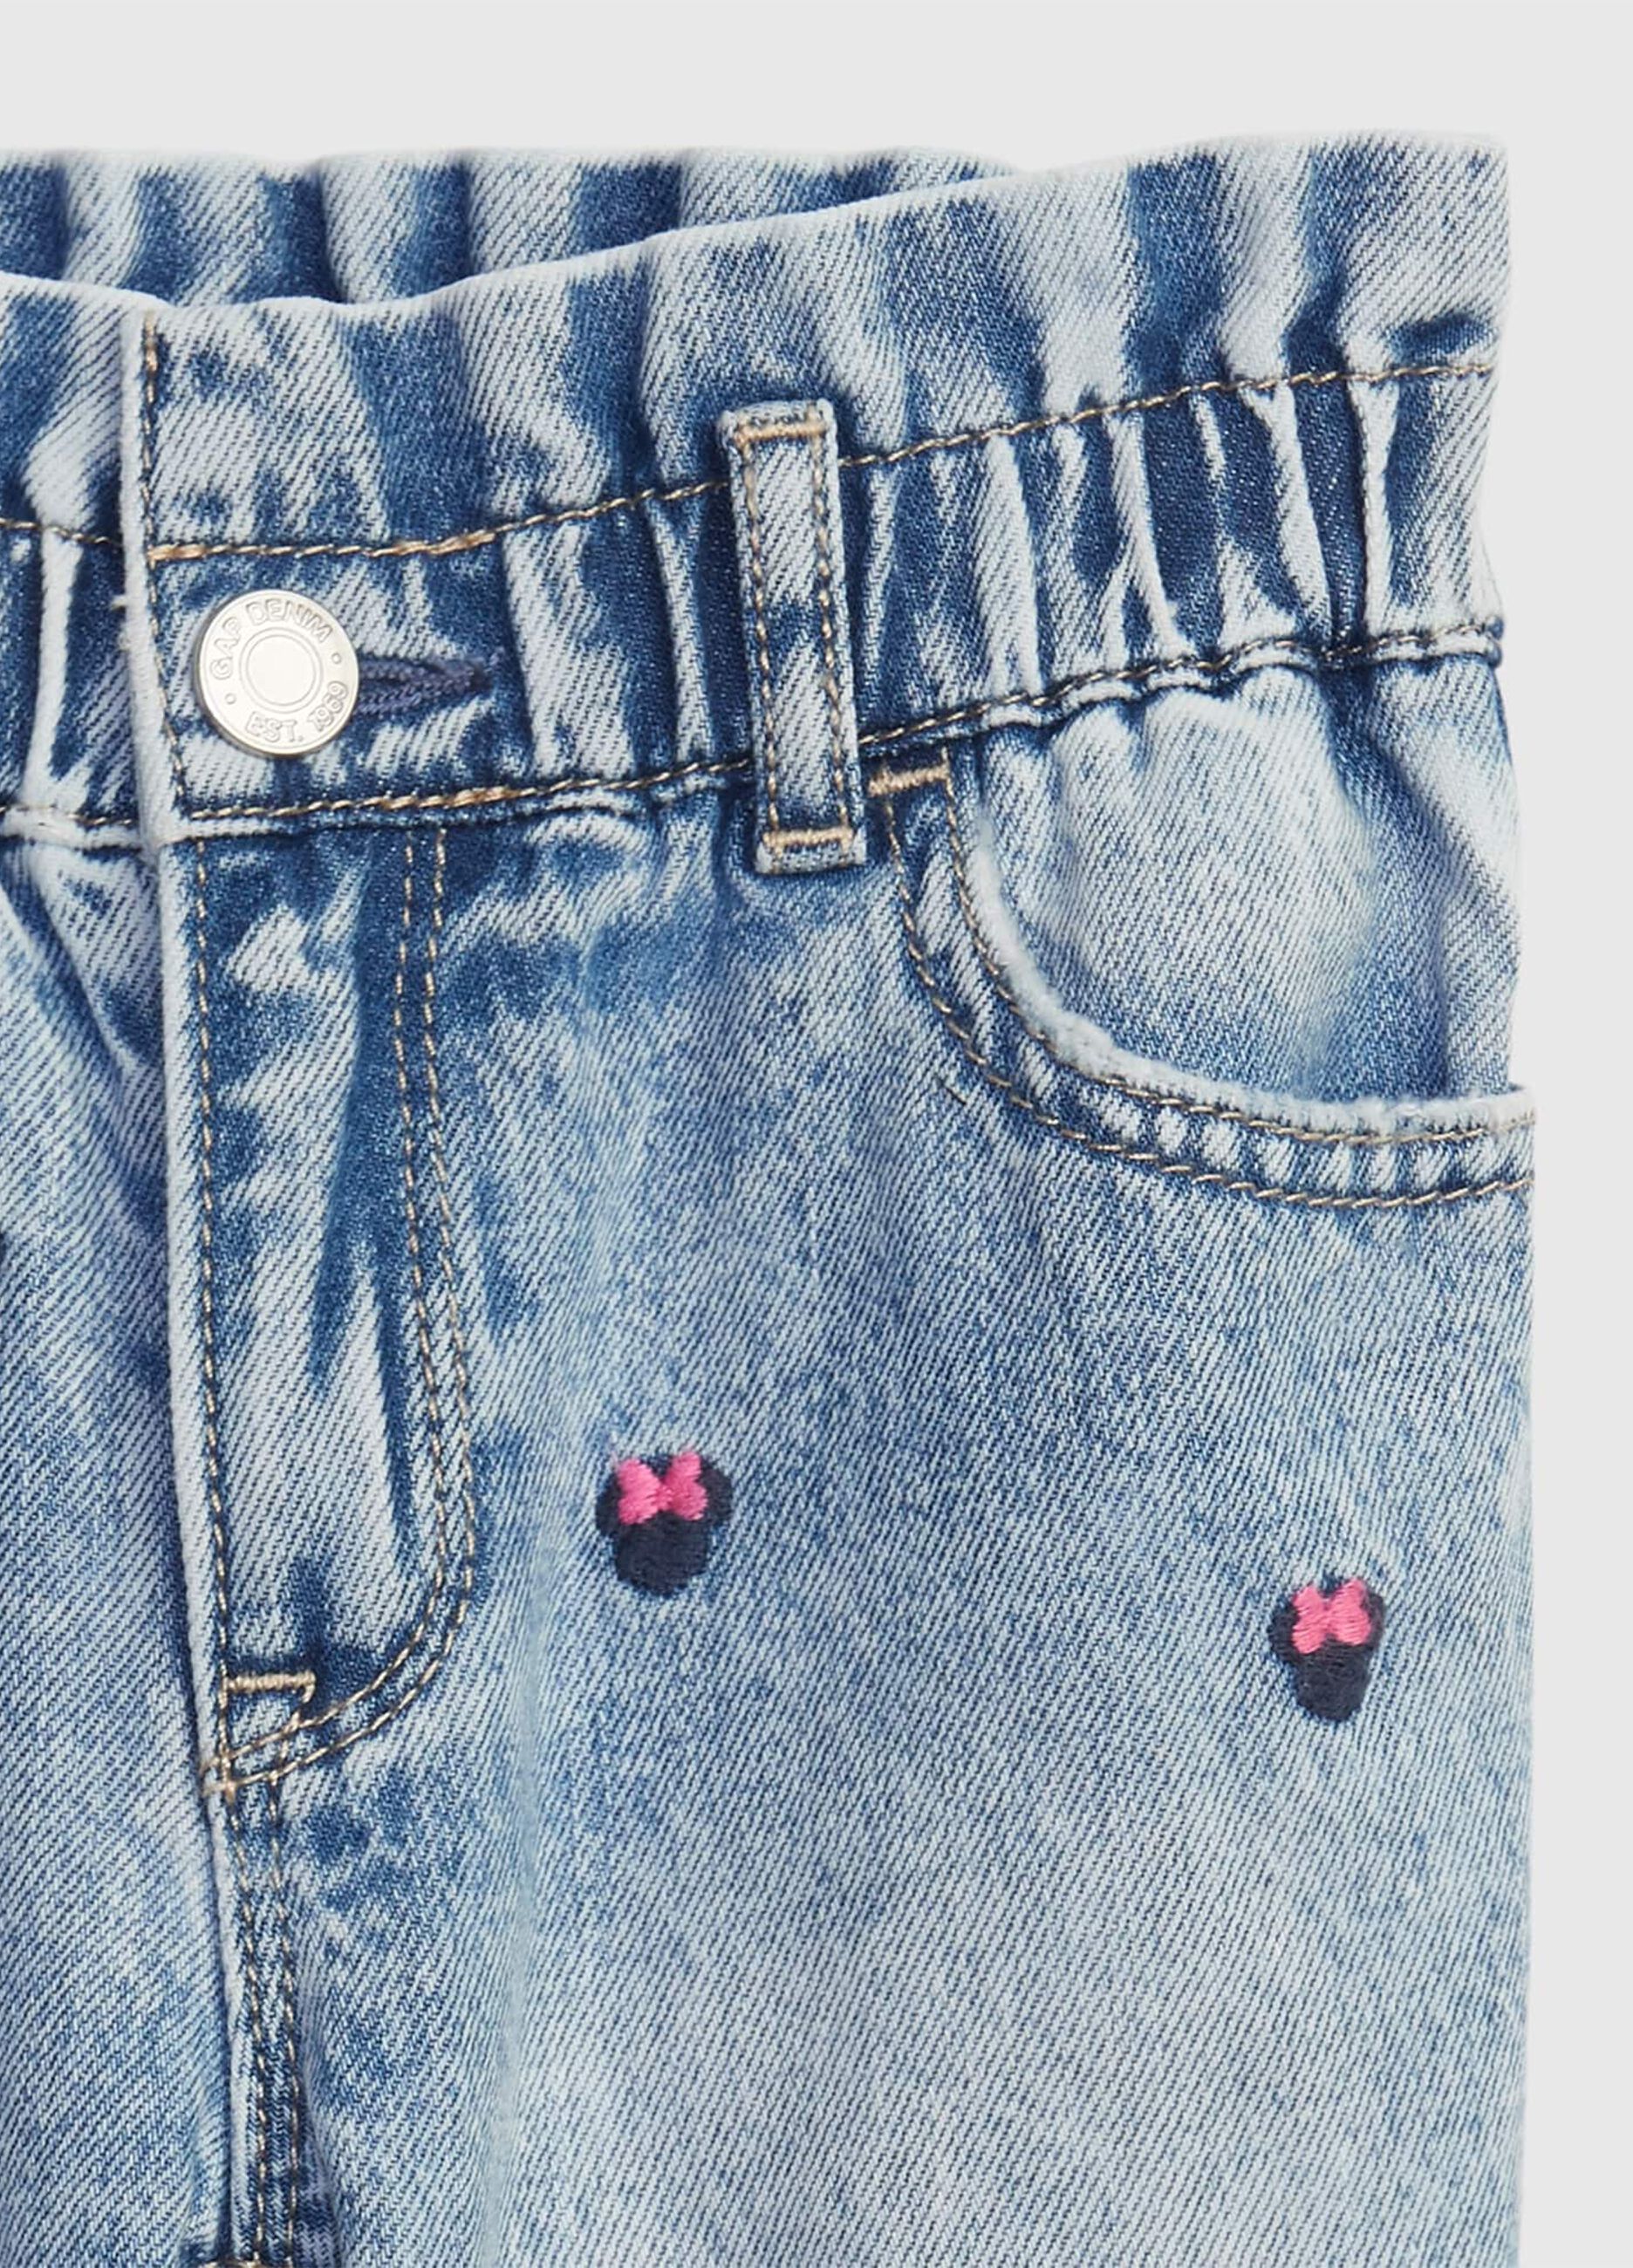 Jeans with Disney Minnie Mouse embroidery